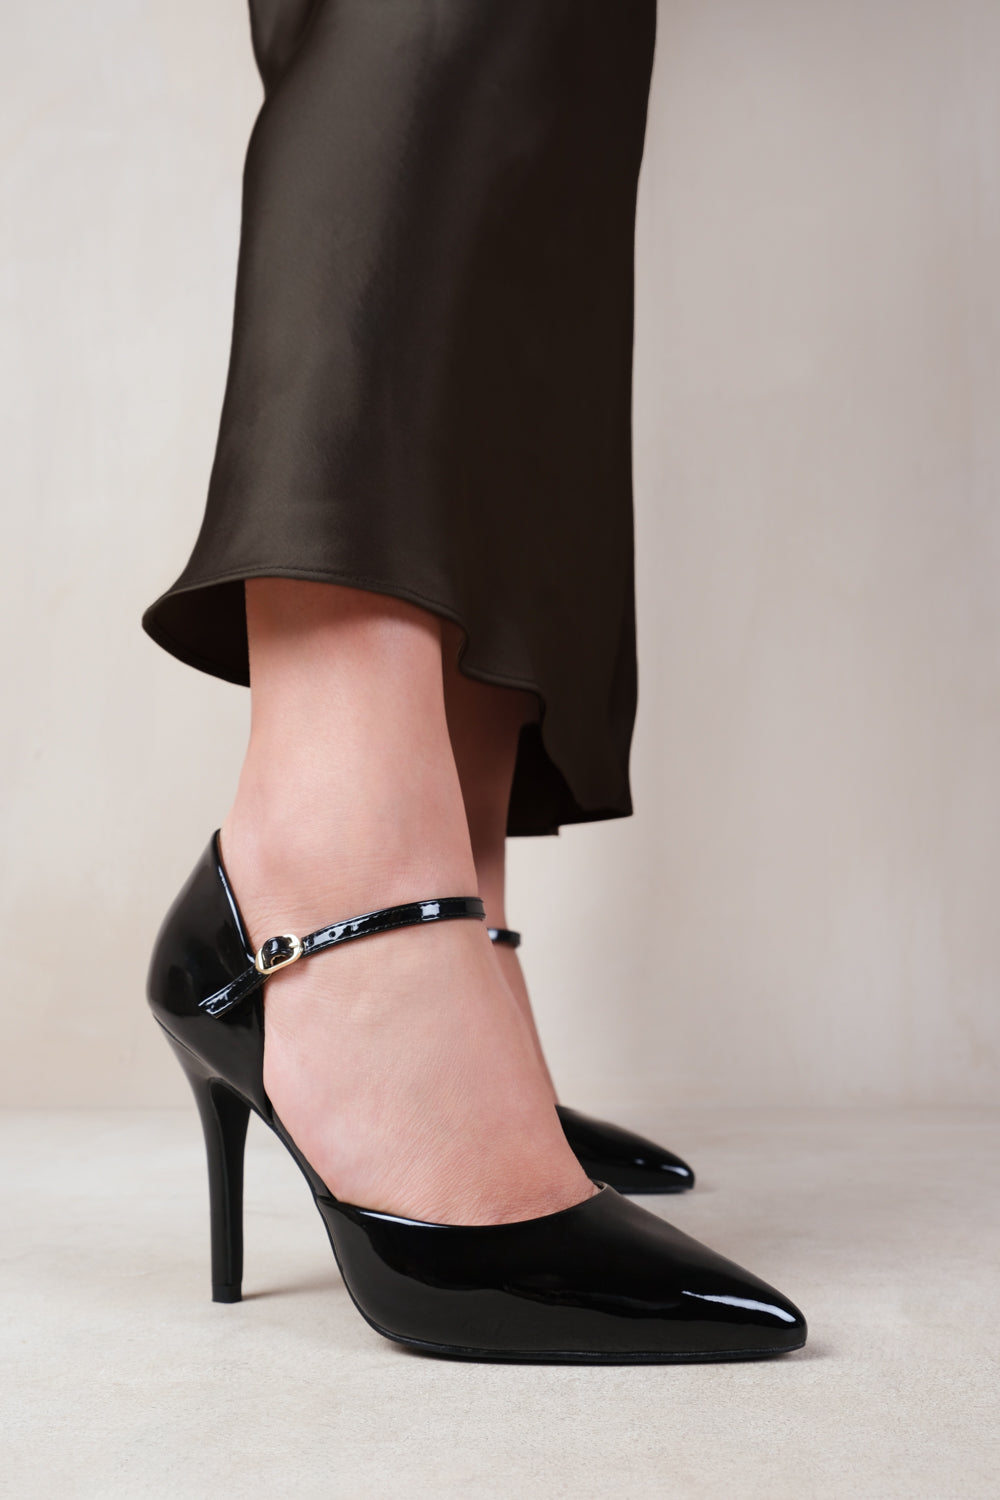 REFLEX MID HIGH HEELS WITH POINTED TOE IN BLACK PATENT